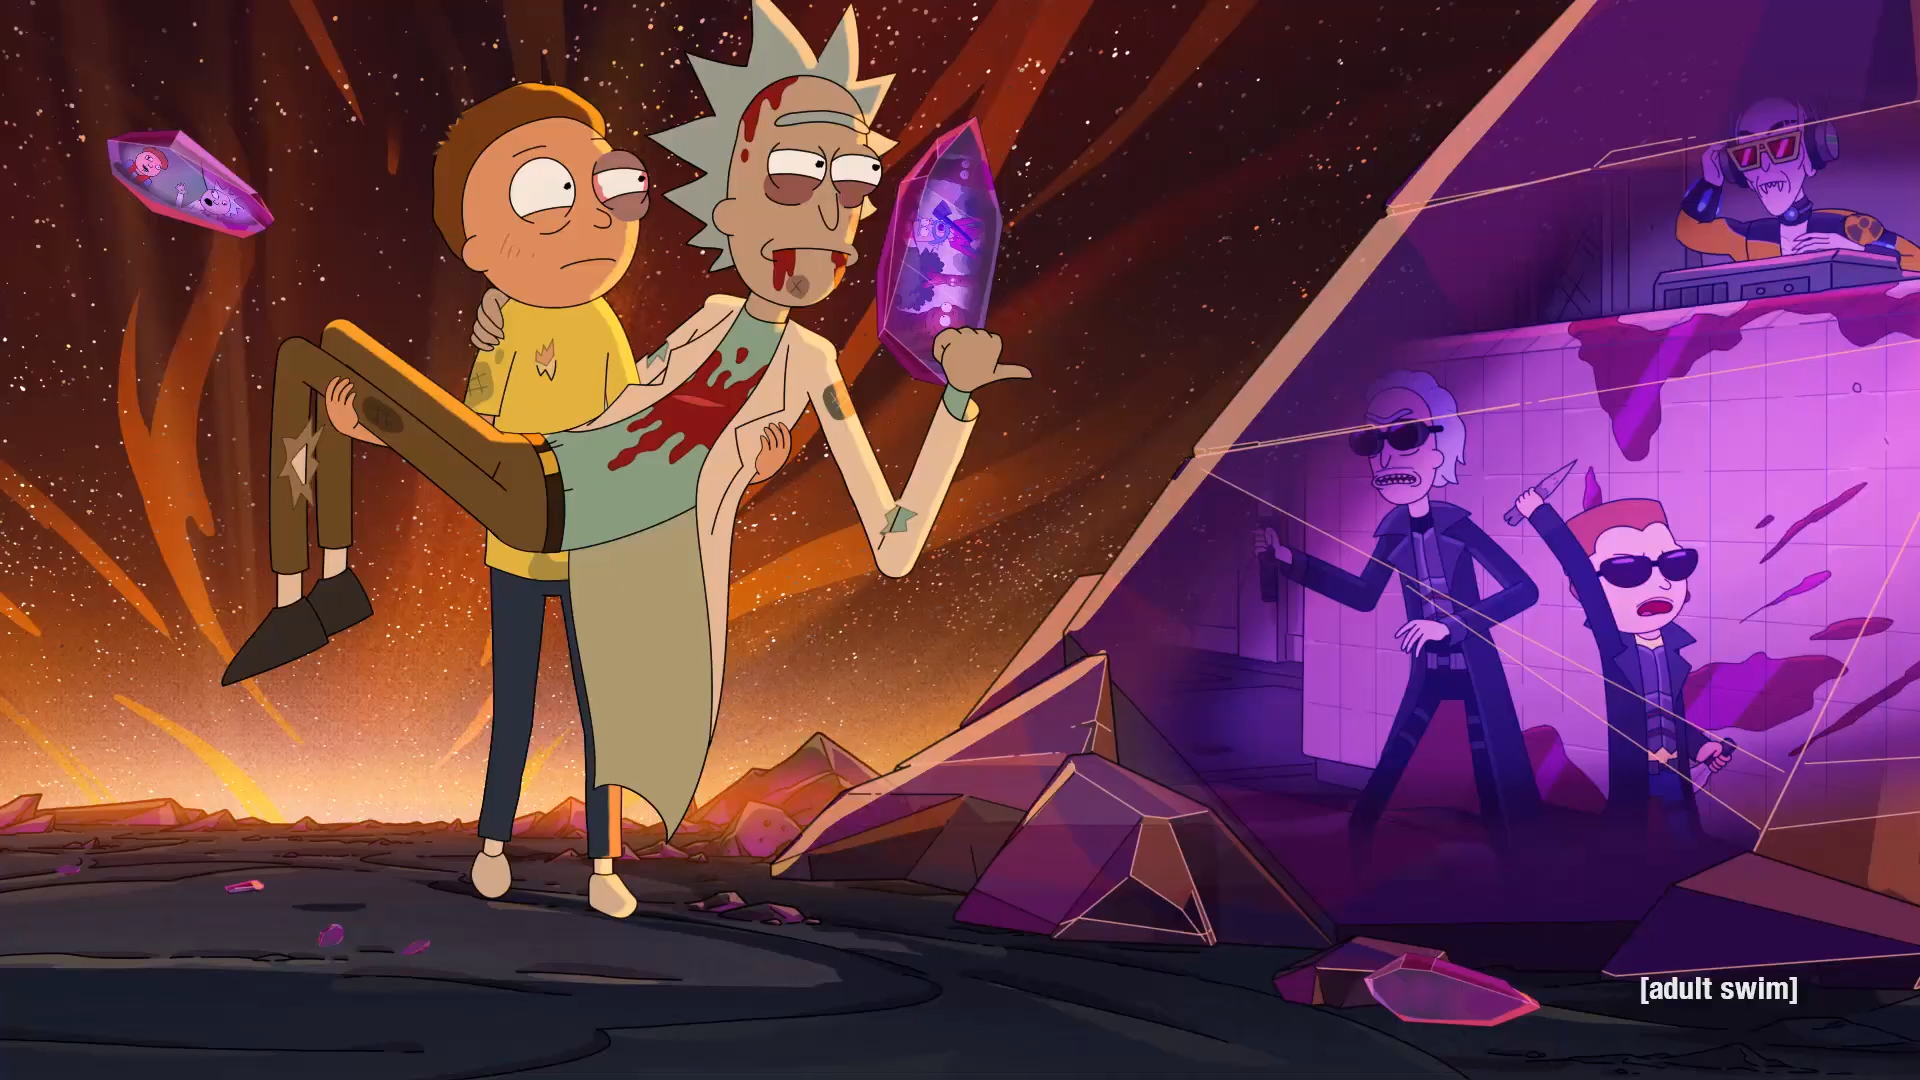 Rick and Morty Kind of Return in a Brutal AnimeInspired Short   Okayplayer